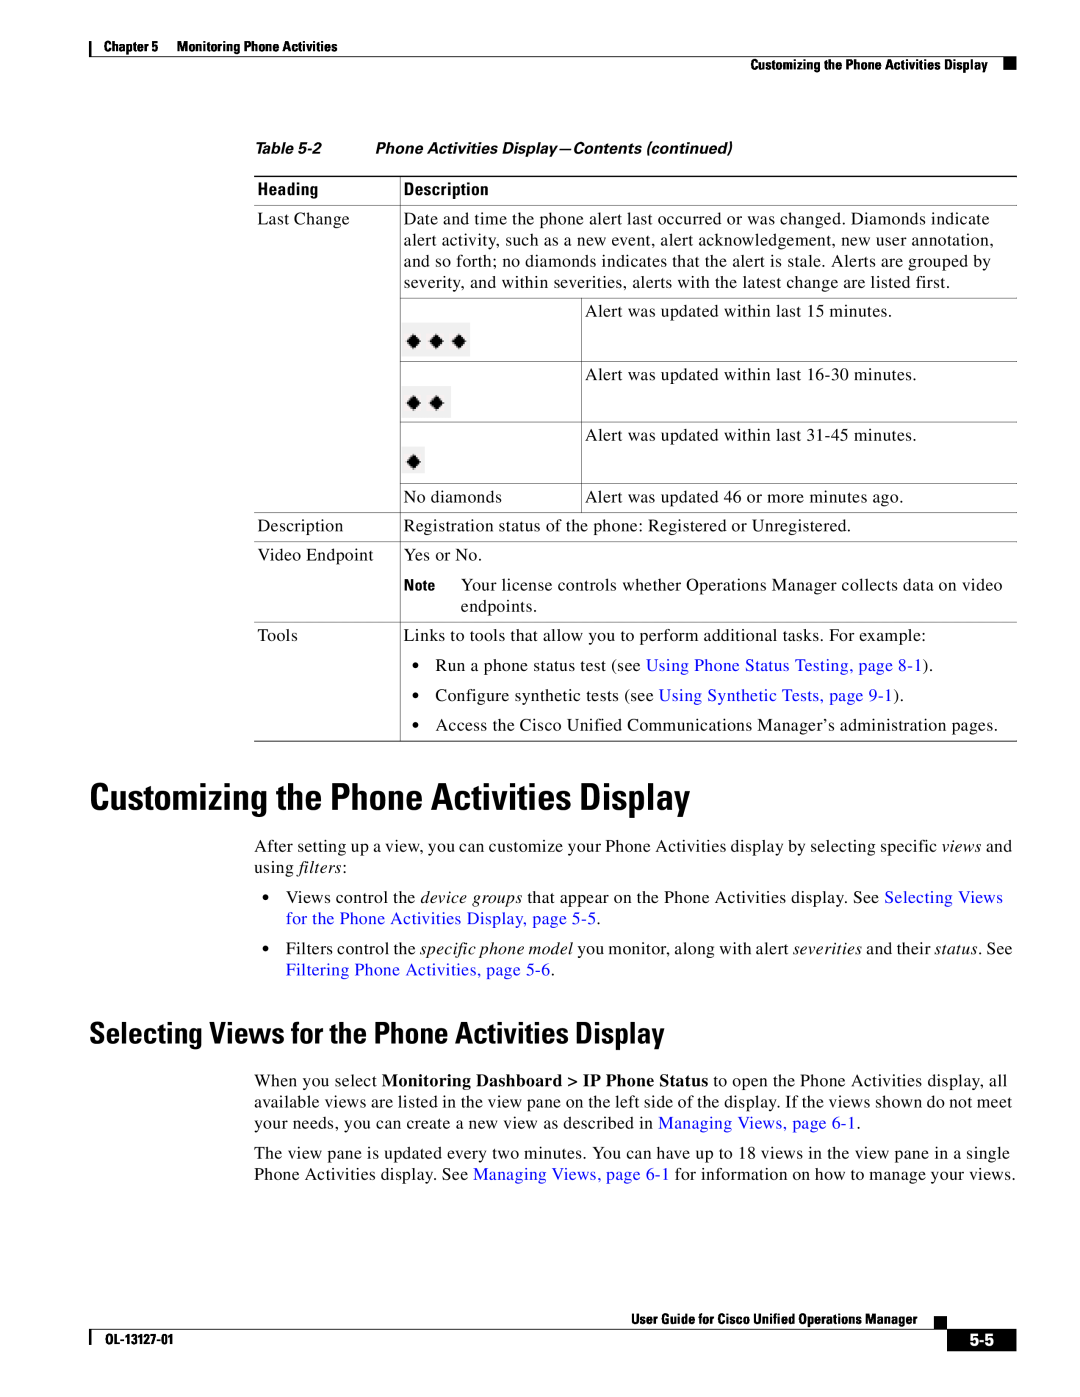 Cisco Systems OL-13127-01 manual Customizing the Phone Activities Display, Selecting Views for the Phone Activities Display 